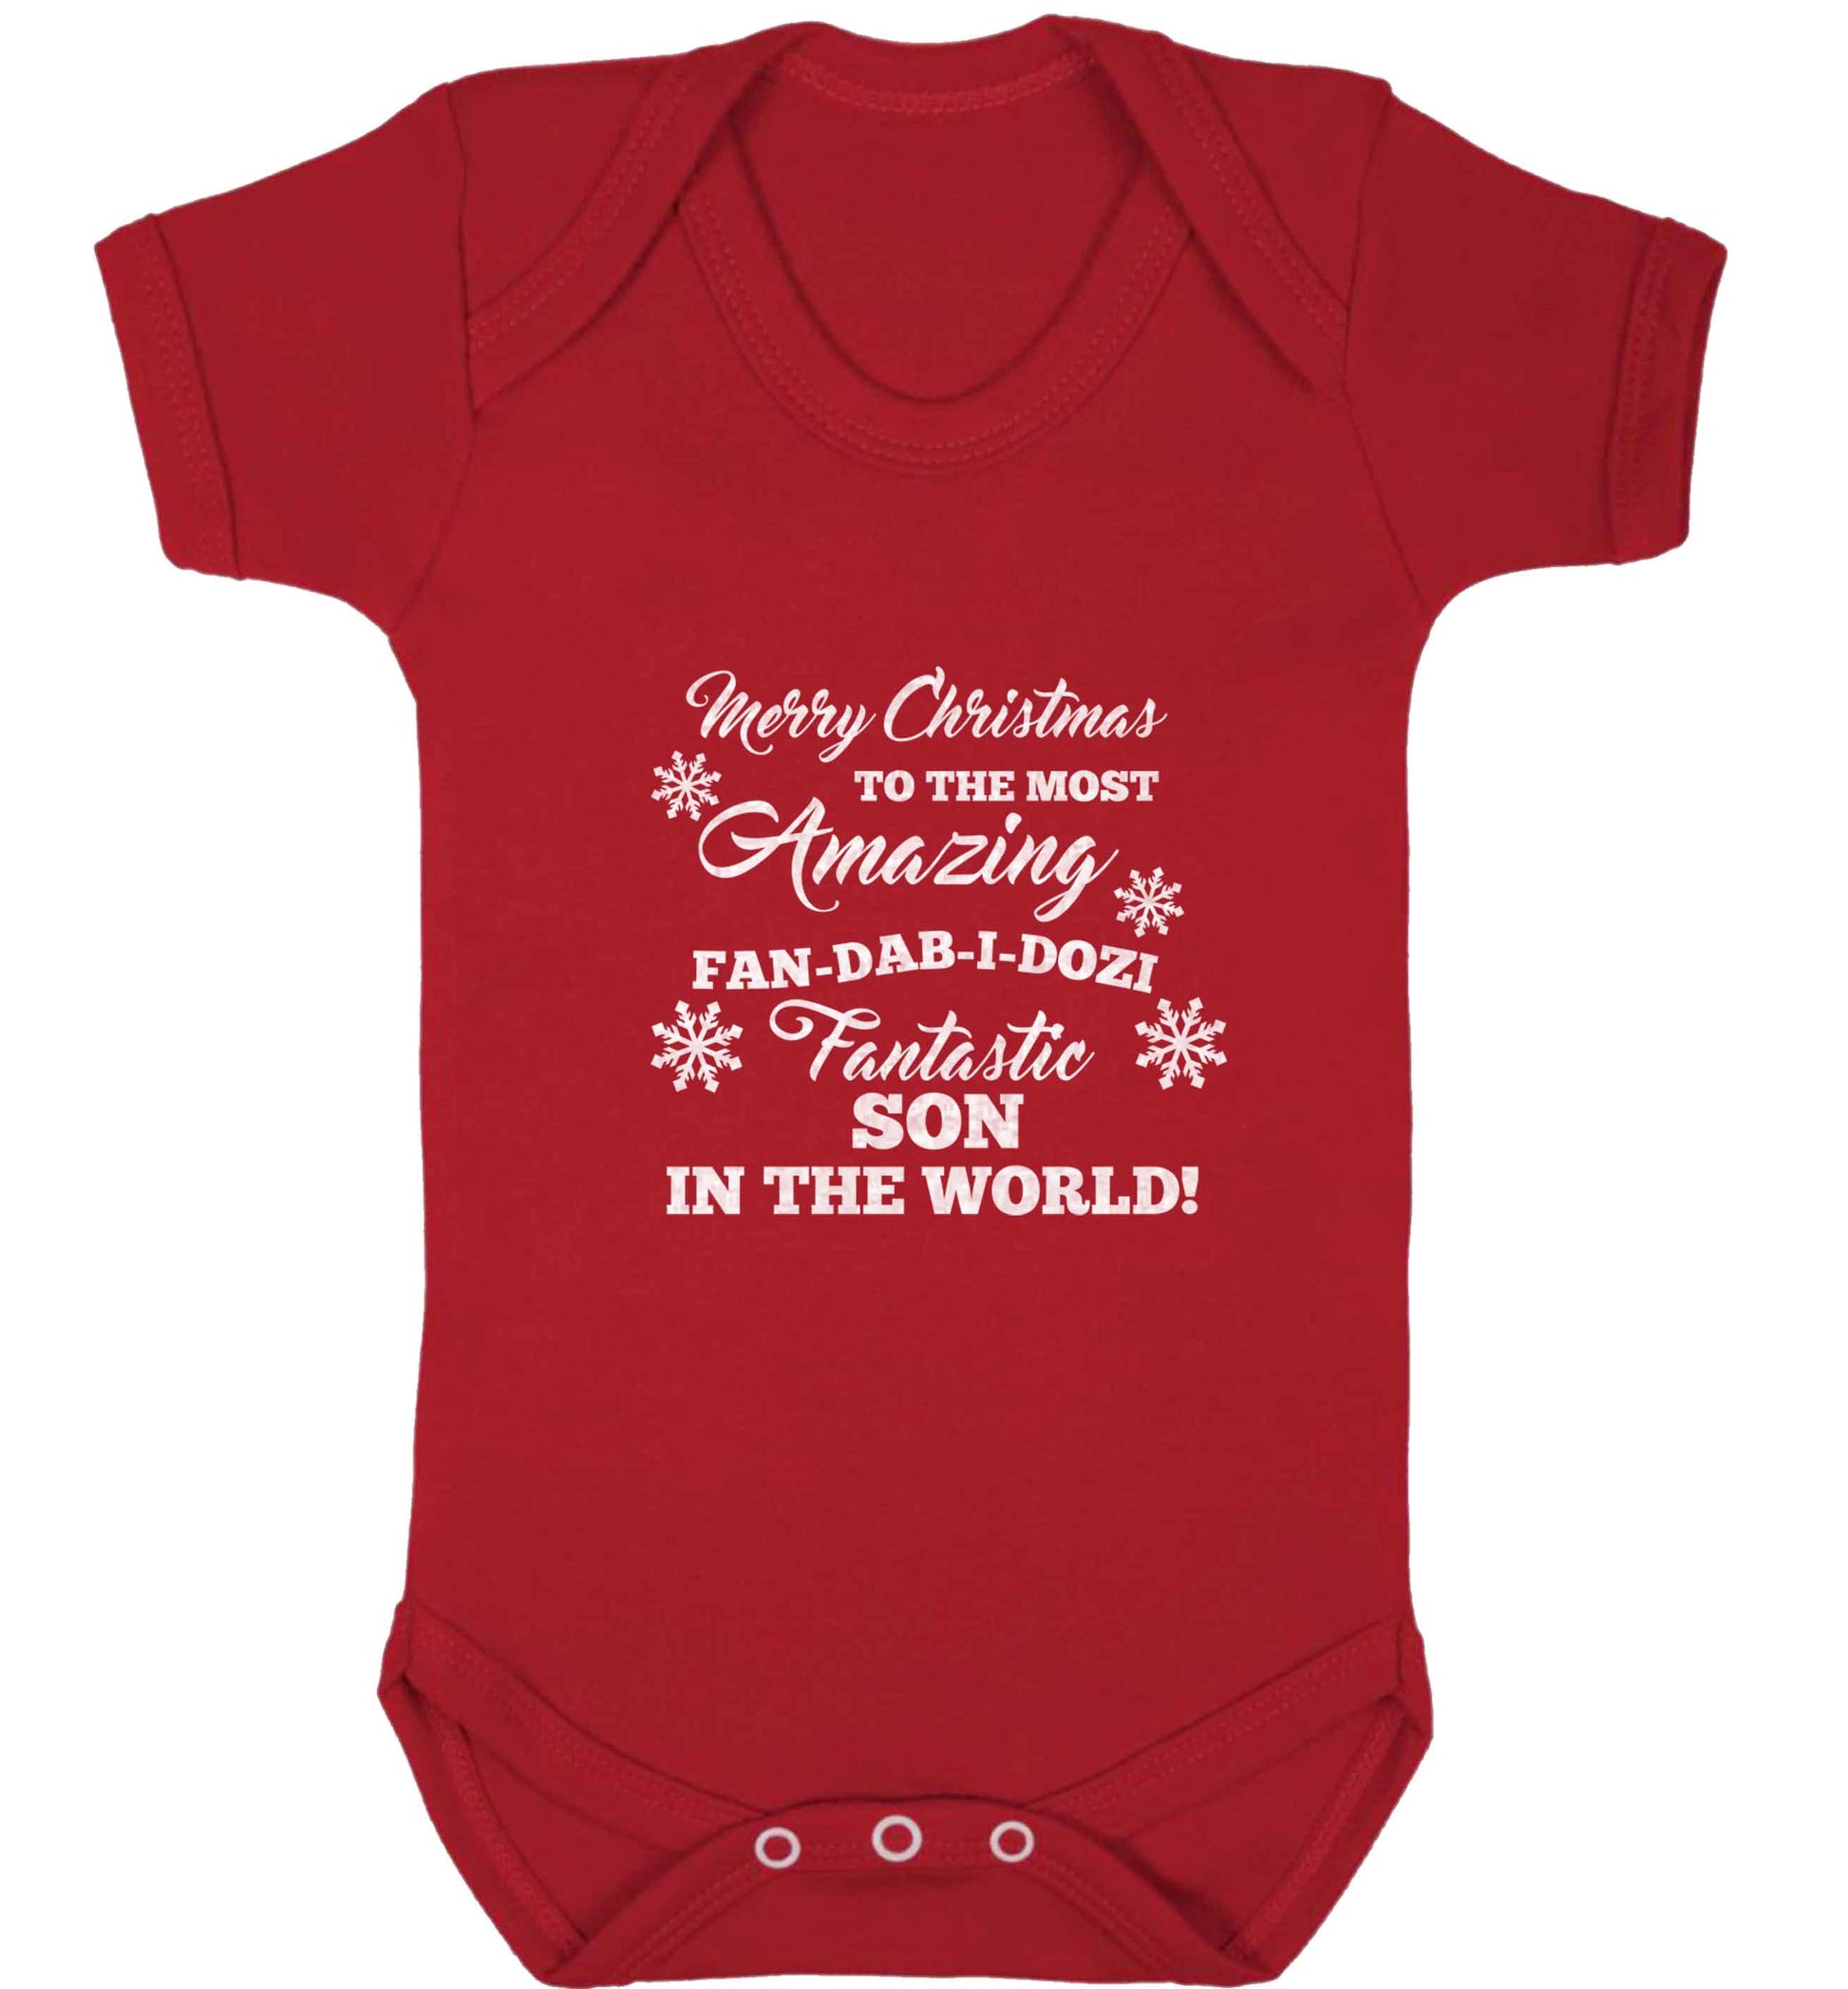 Merry Christmas to the most amazing fan-dab-i-dozi fantasic Son in the world baby vest red 18-24 months